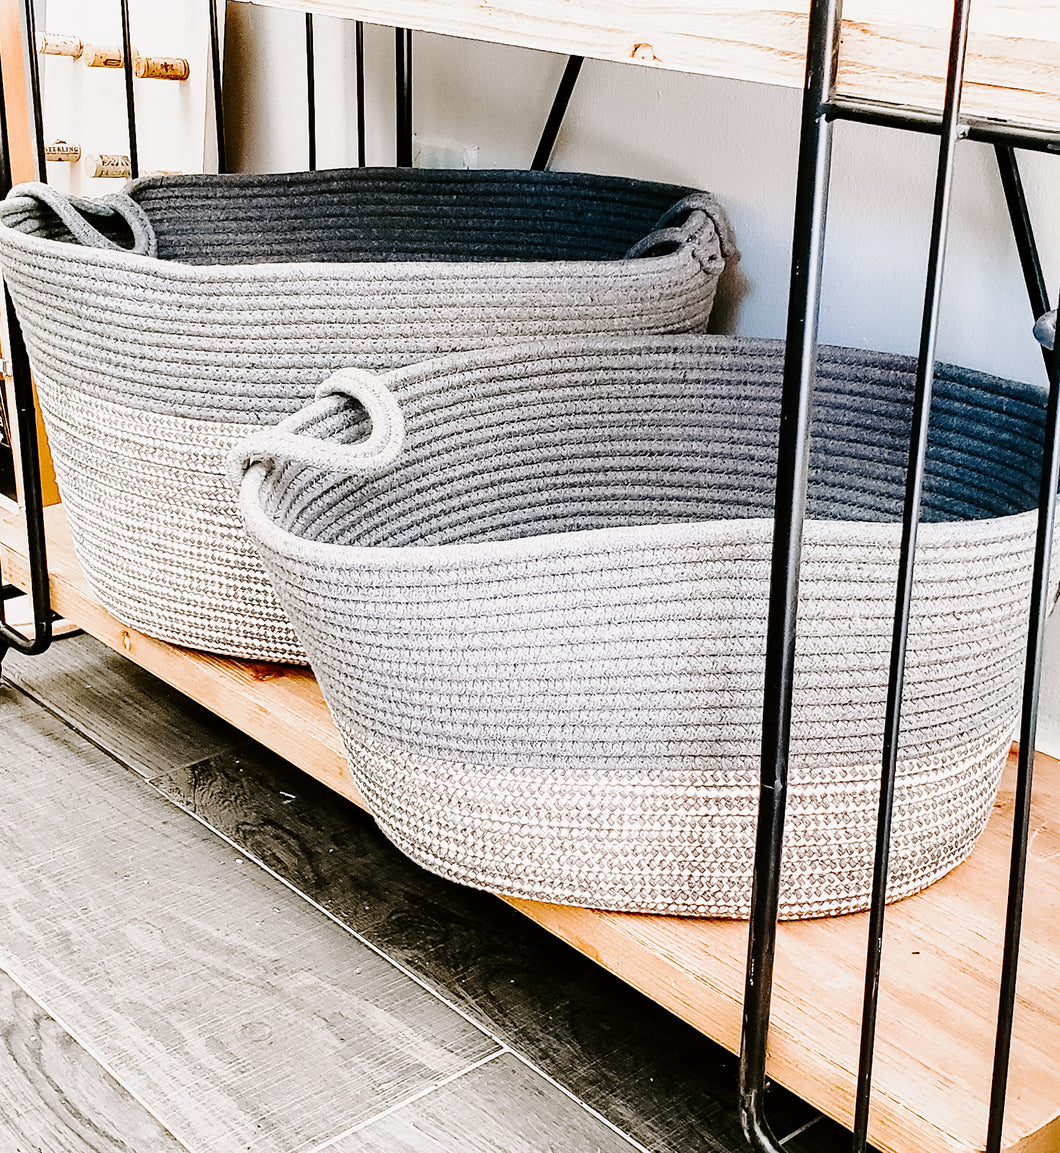 Grey and Cream Two Tone Nesting Baskets with Handles